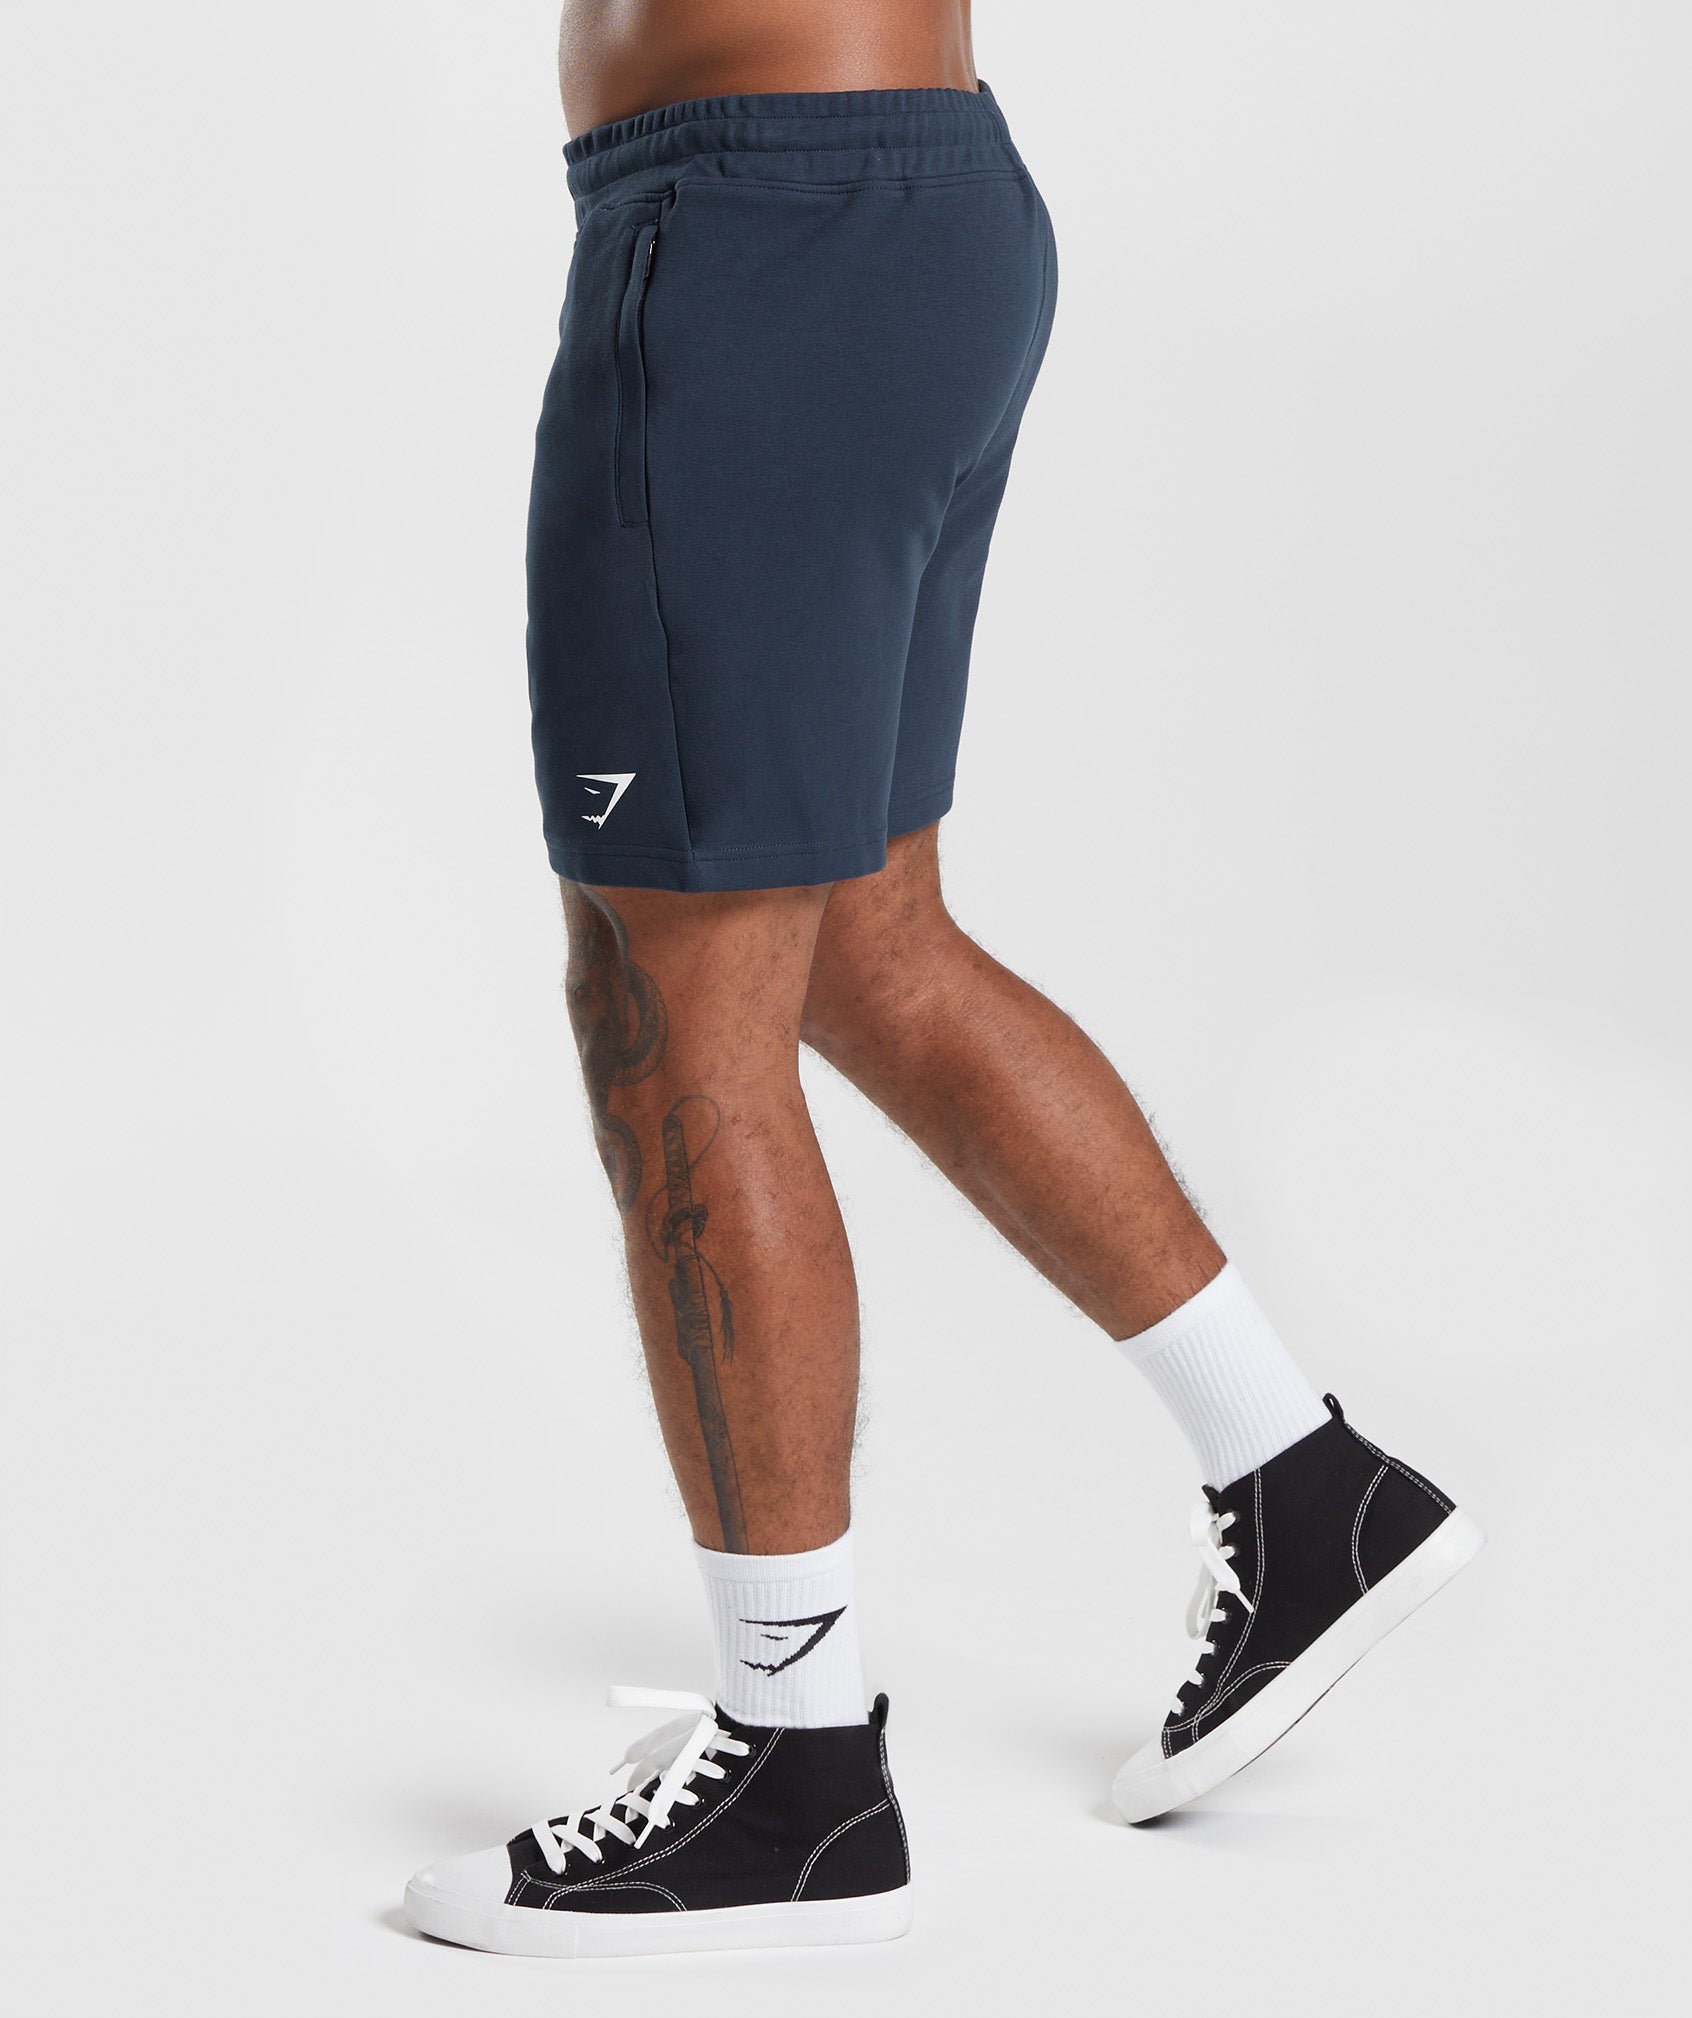 React 7" Shorts in Navy - view 3